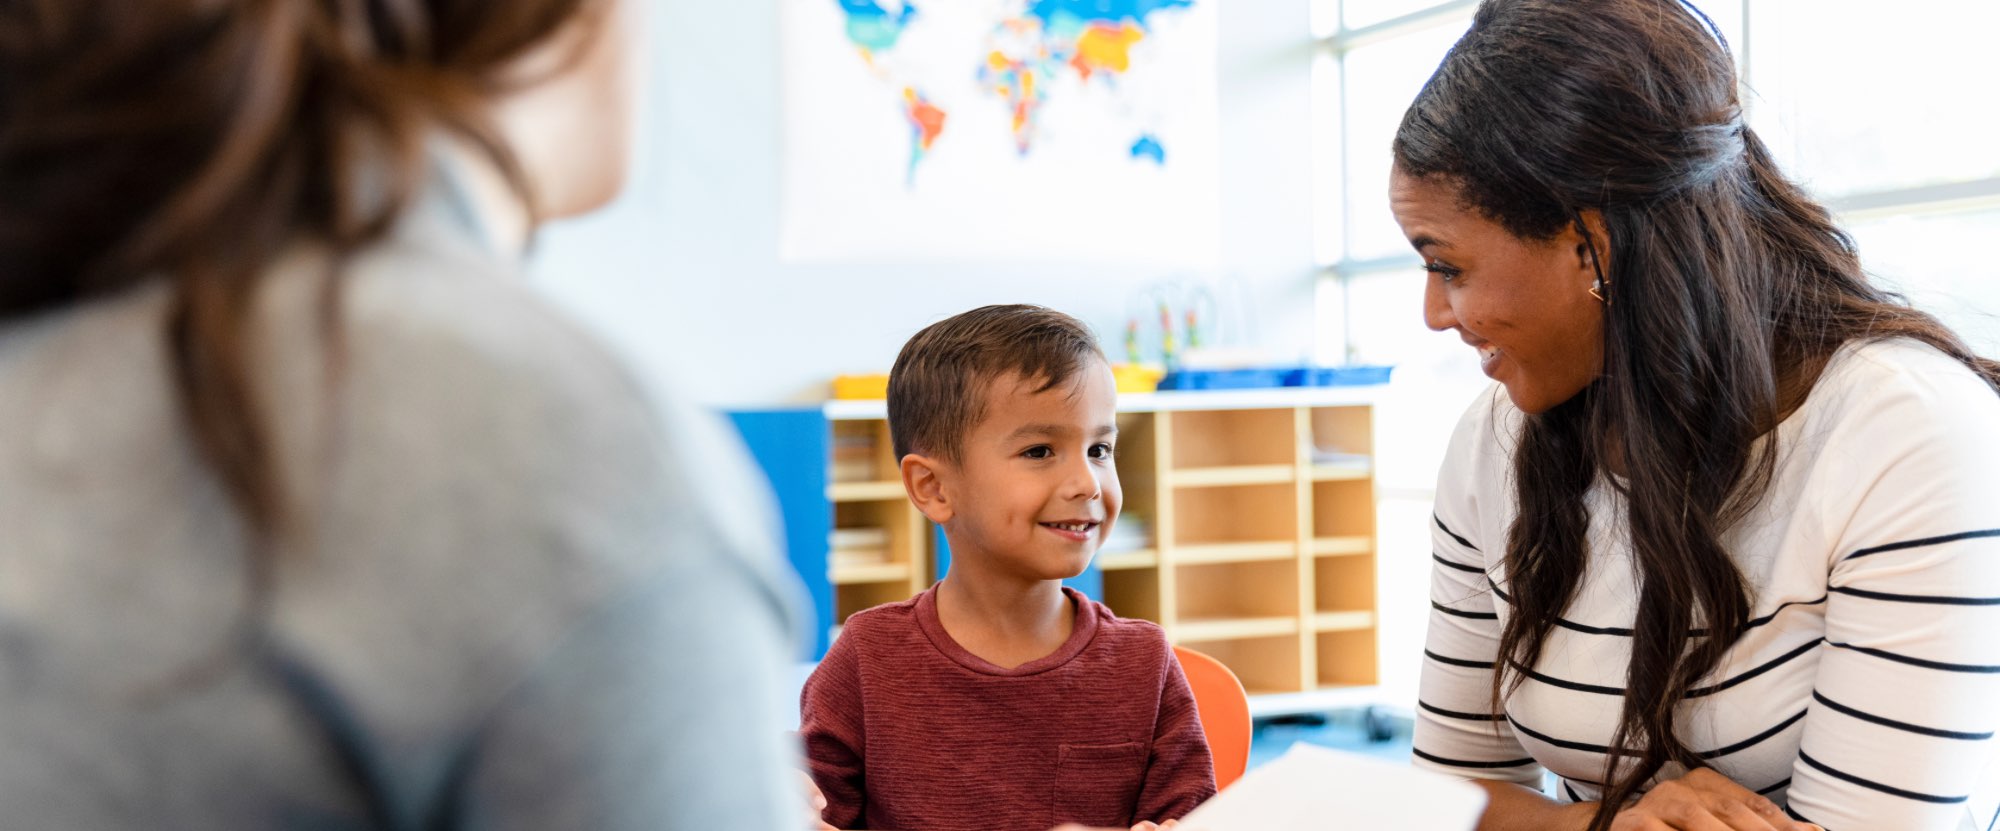 A male child is sitting on a chair in a classroom with two adults. One of the adults has their back to the camera, the other adult female is looking at the child smiling. They look happy.